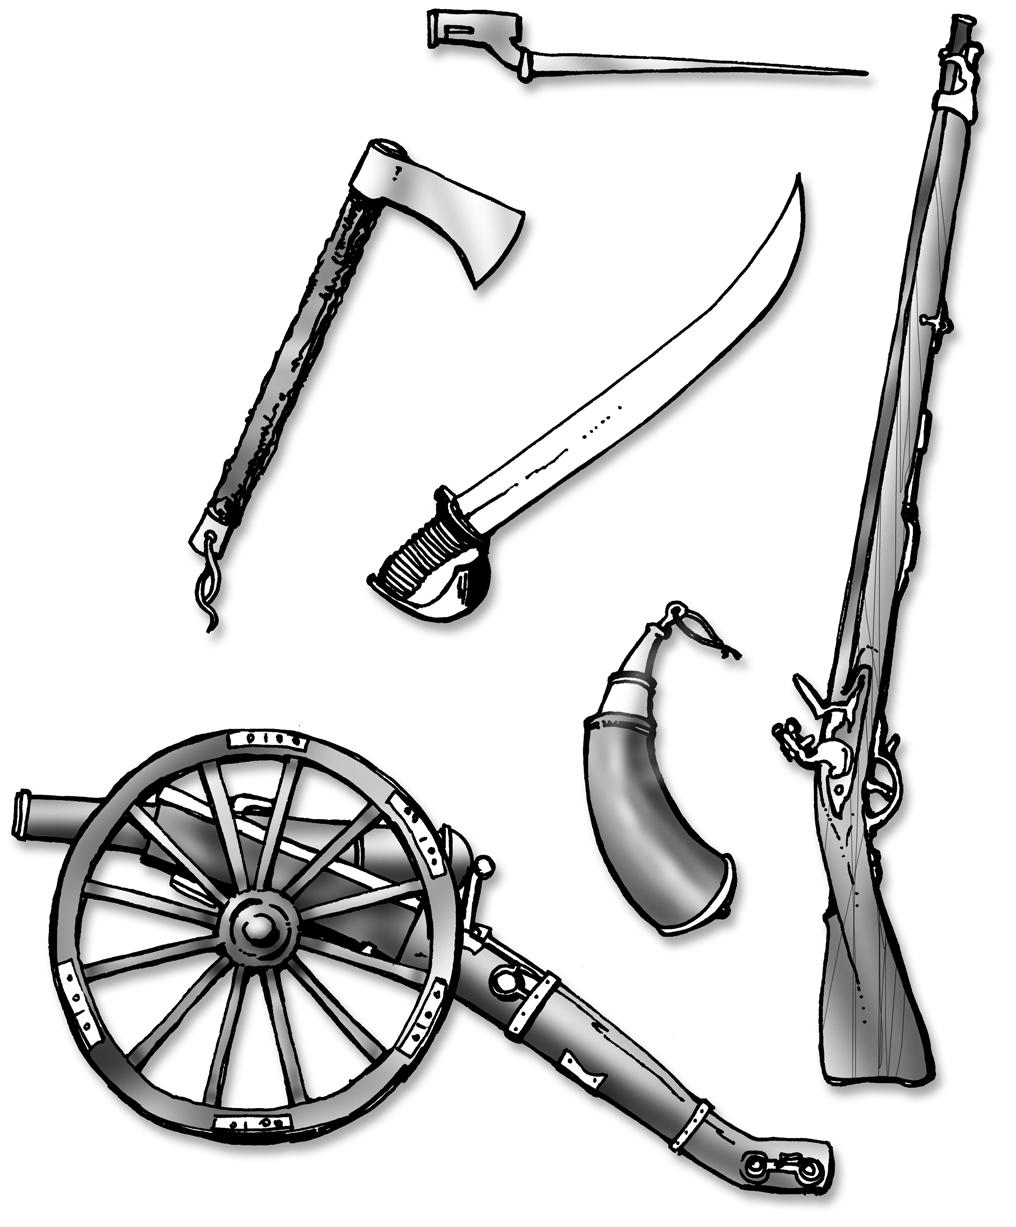 Name Name the Weapons Draw a line from each American weapon or piece of equipment used in the Revolutionary War to its correct name.